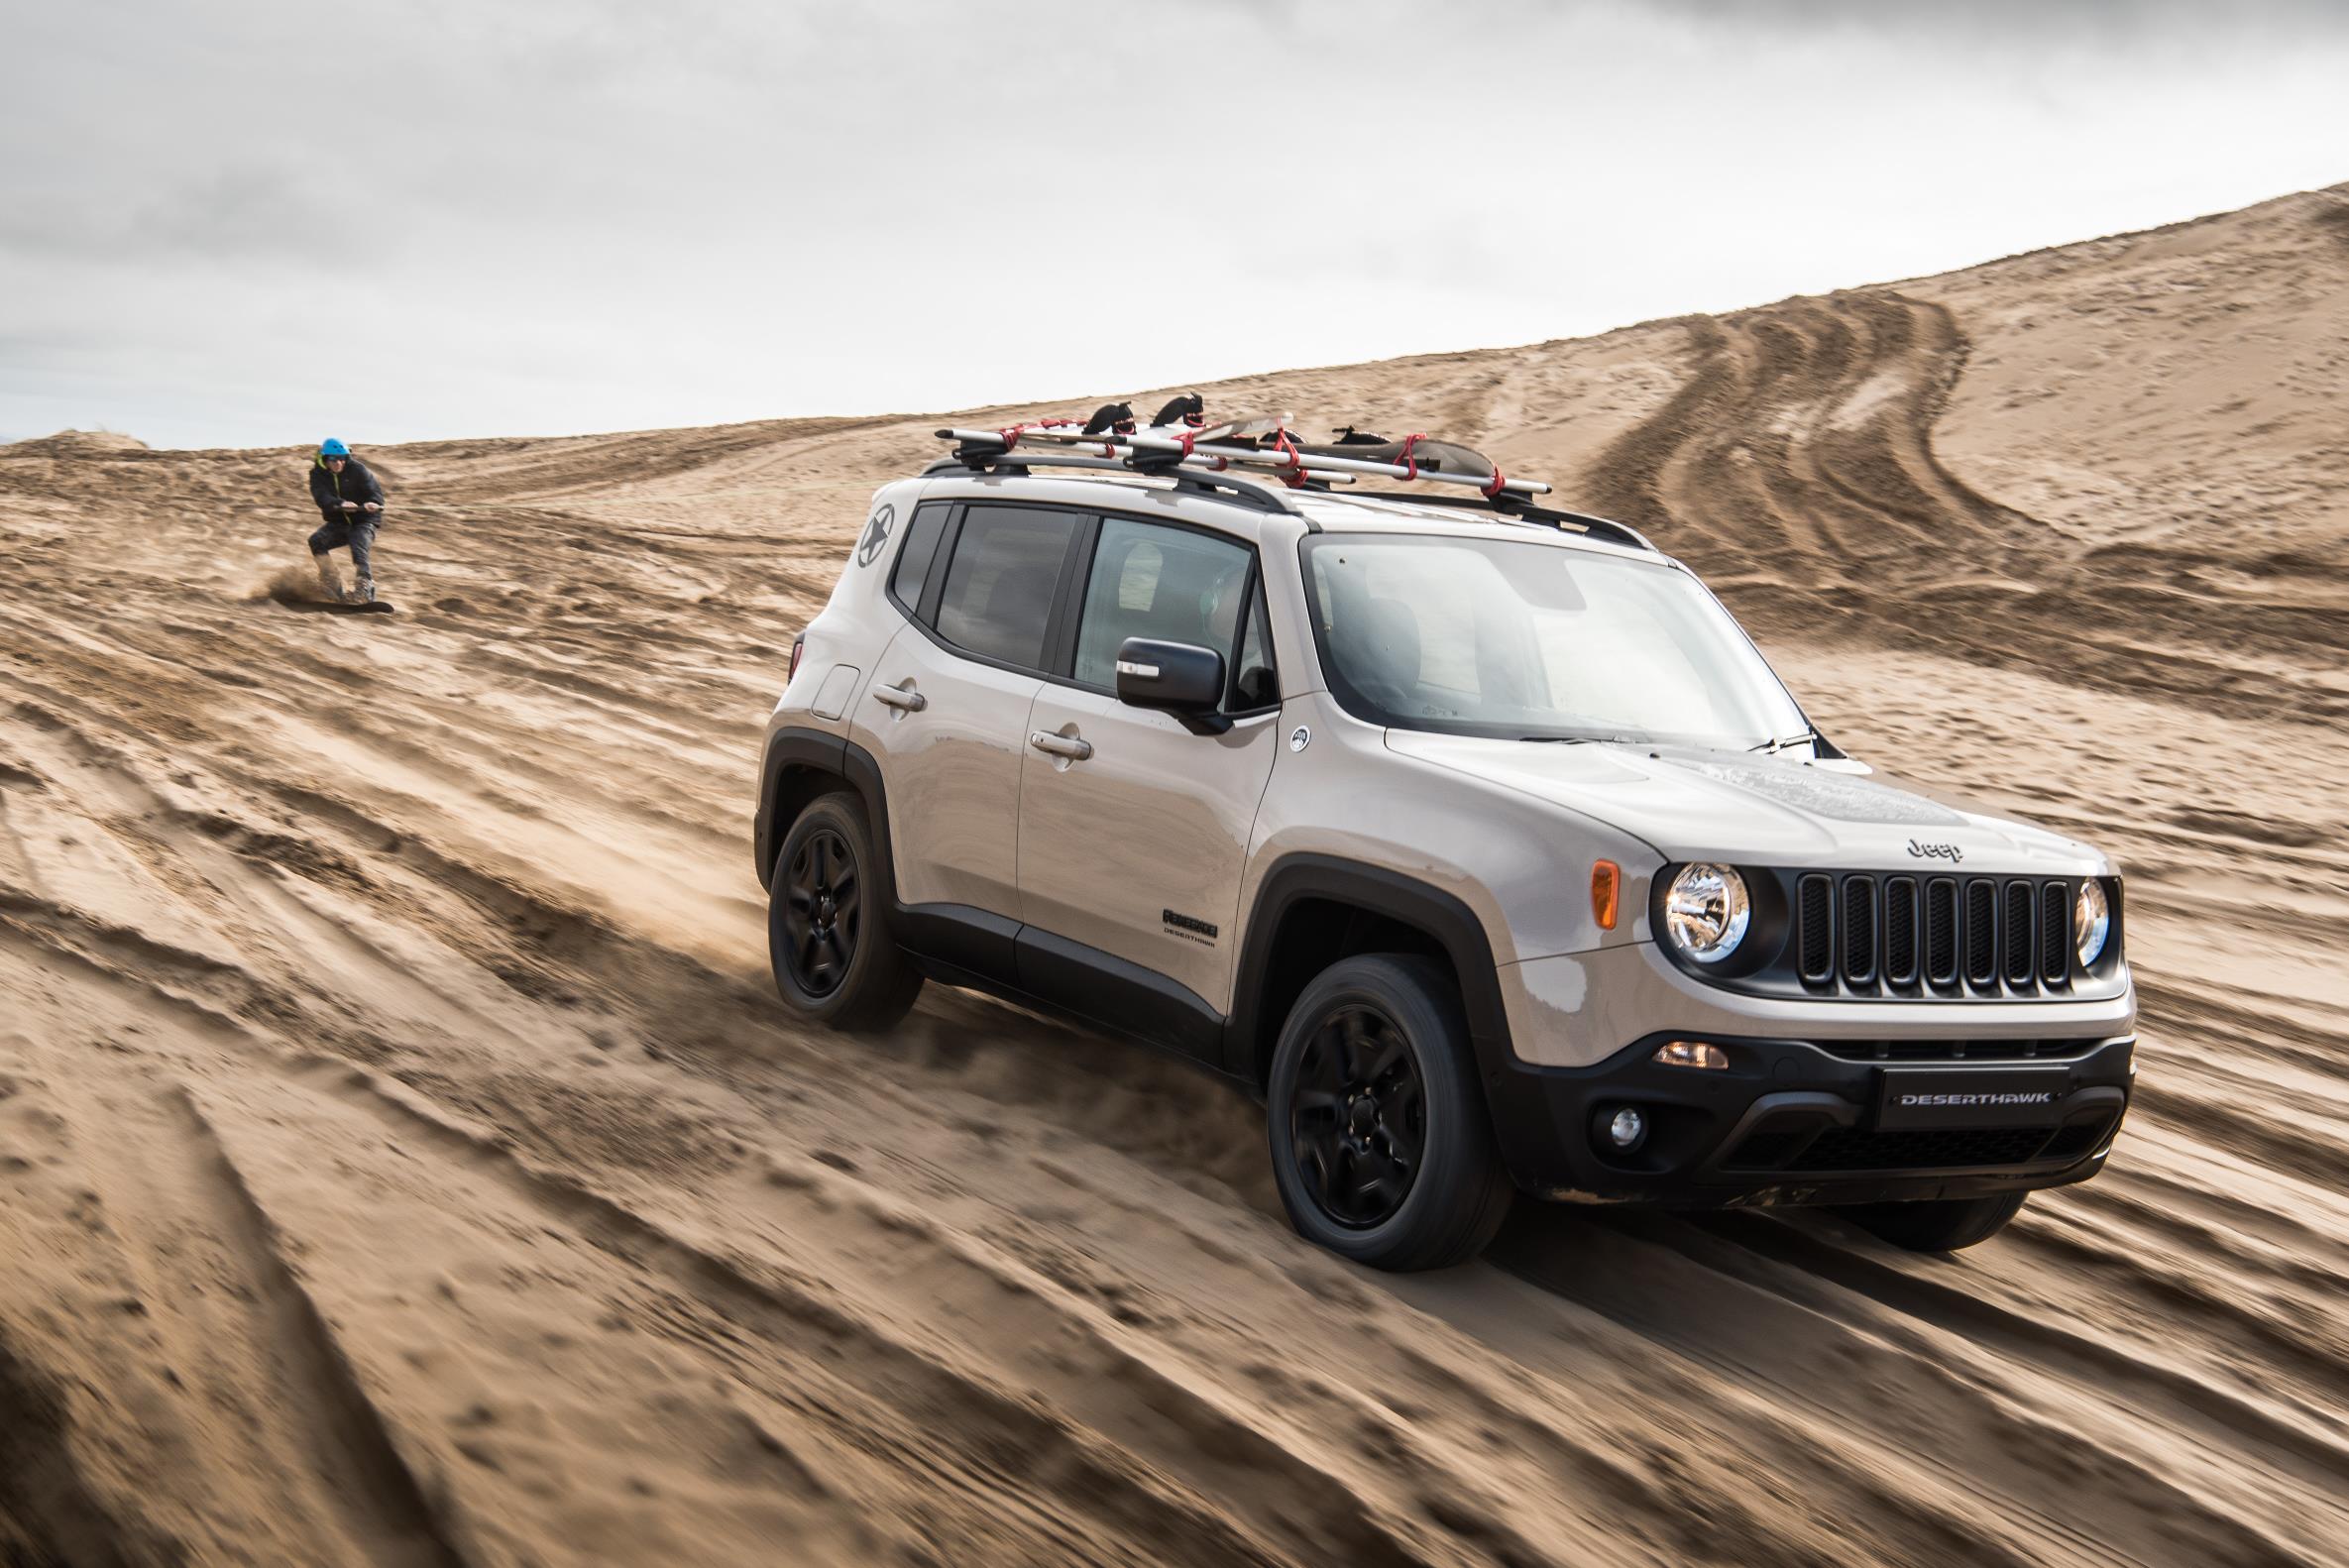 2019-jeep-renegade-facelift-says-cheese-to-the-camera-shows-led